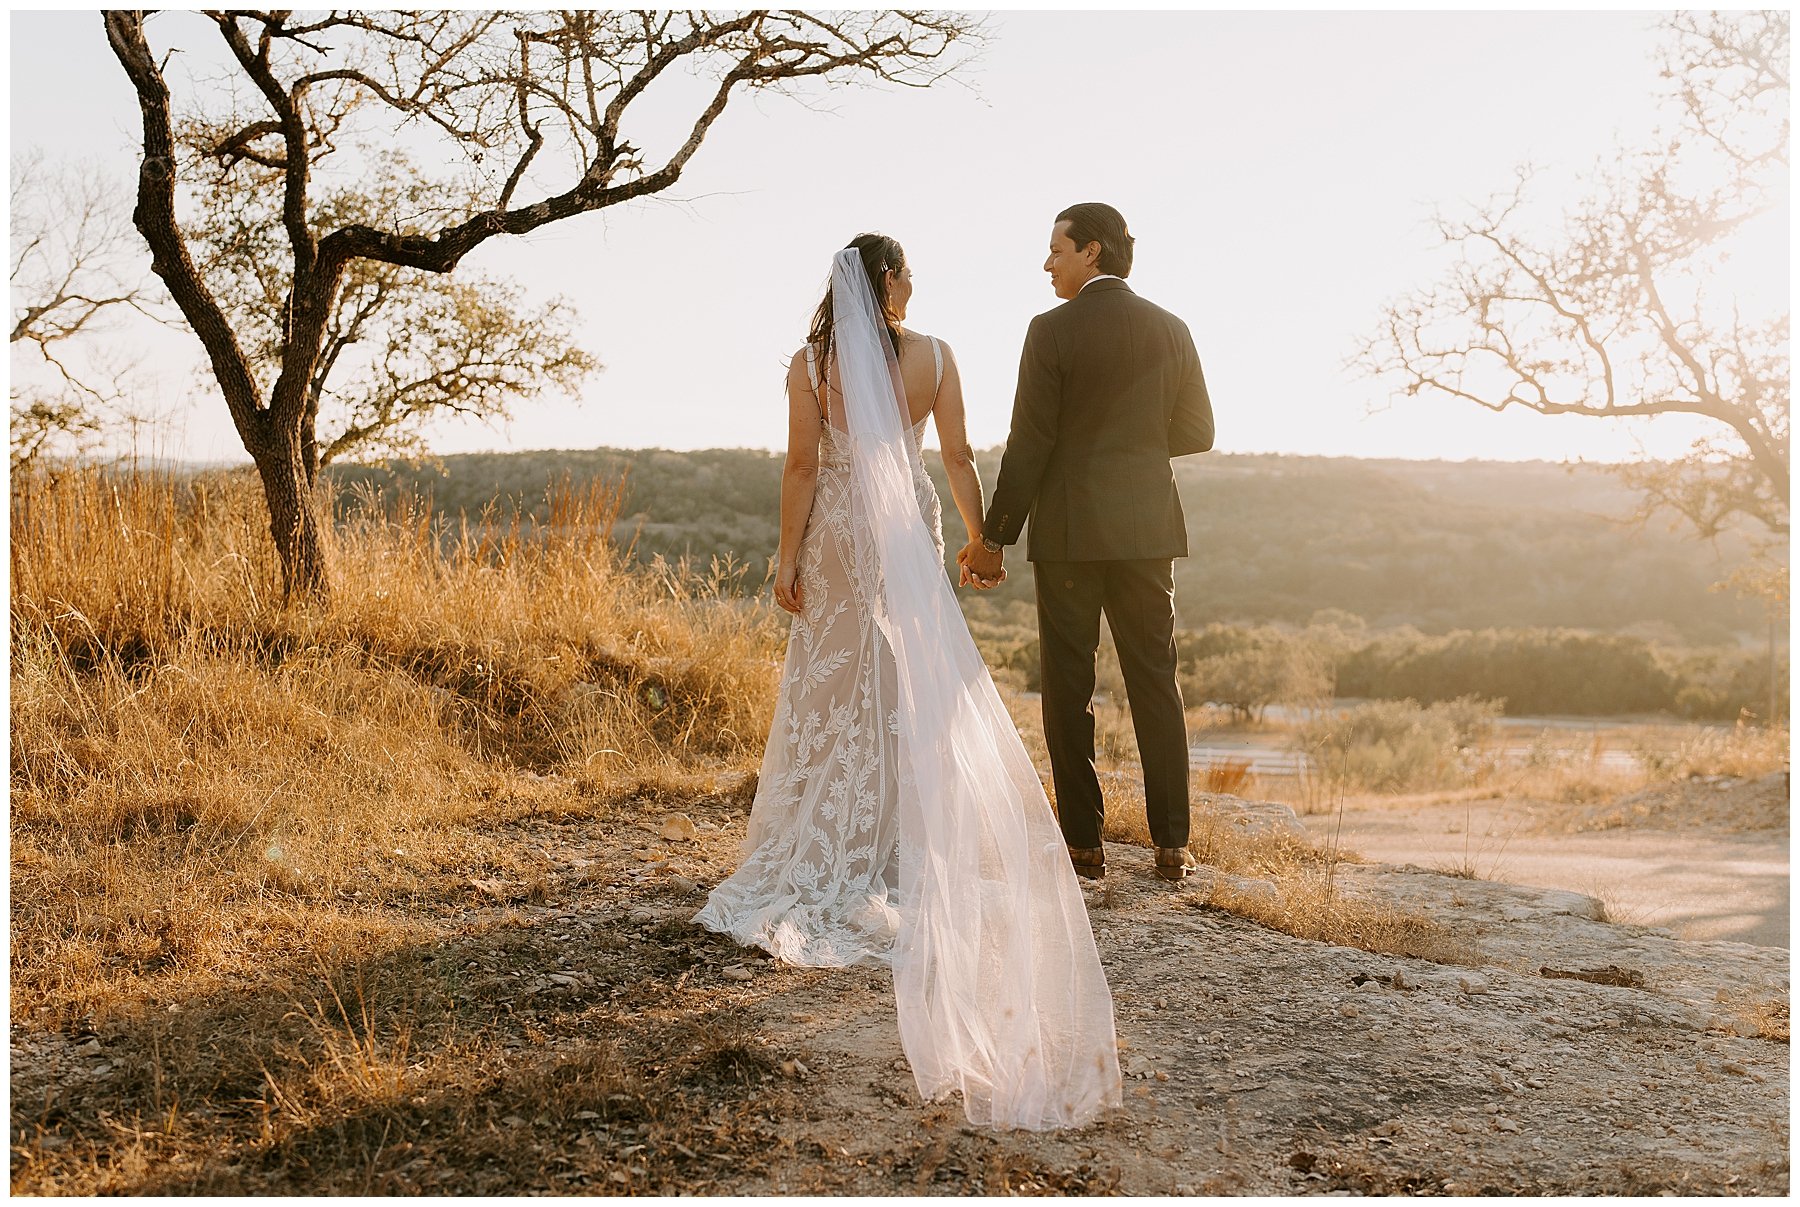 Sunset Couples Portraits at Mae's Ridge | Hill Country Wedding Venue | Ashley Medrano Photography